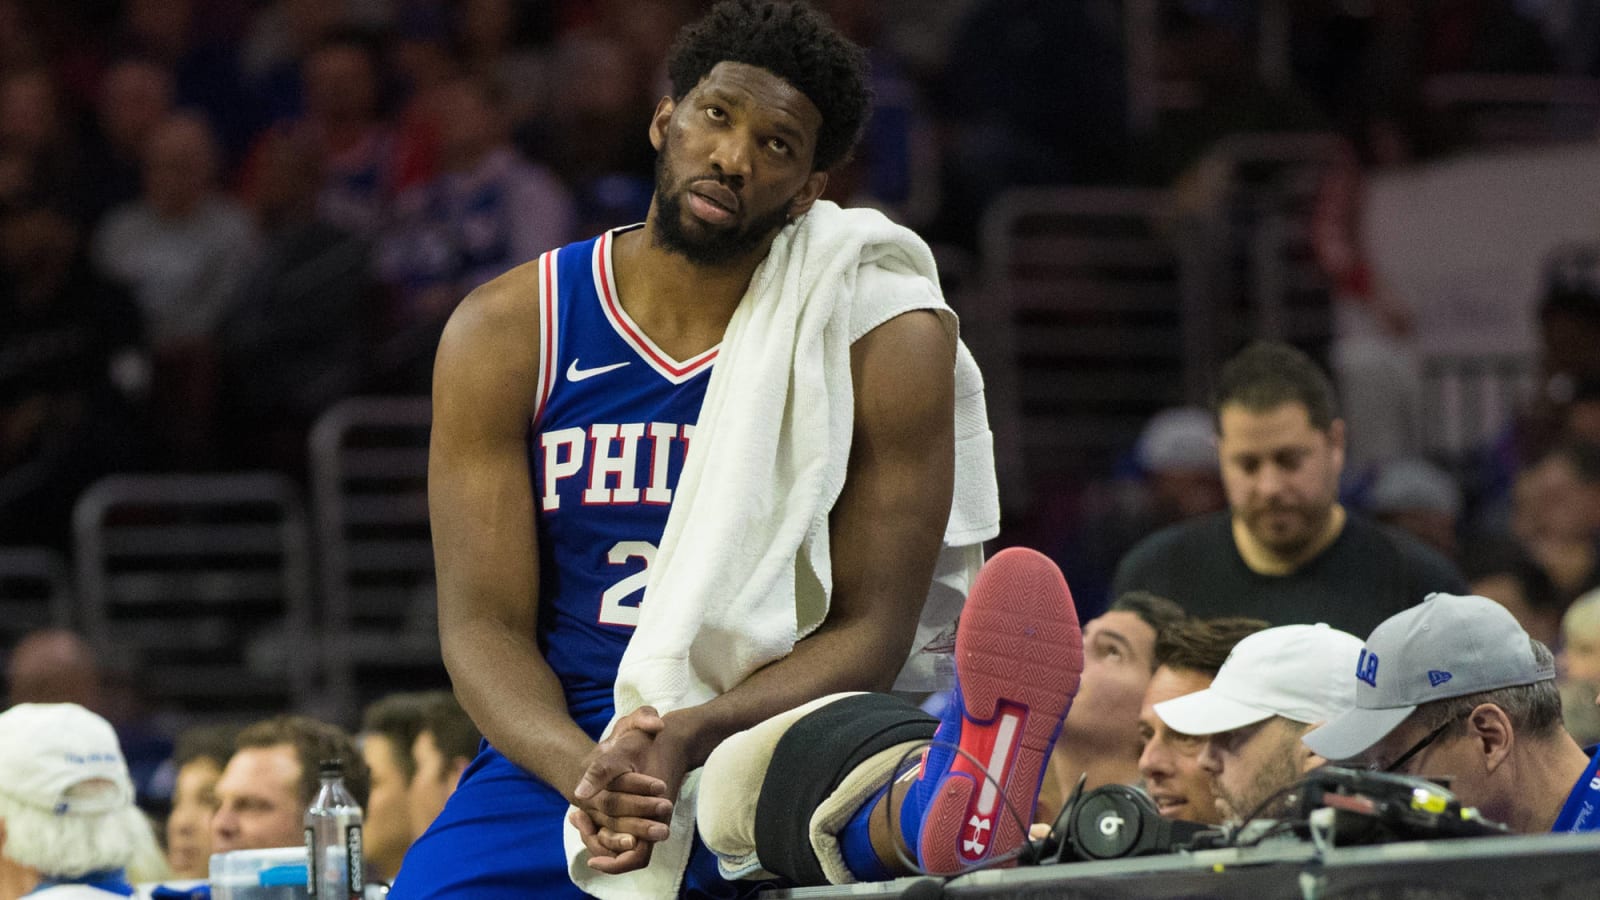 Watch: Joel Embiid gets technical foul for finger-point after dunk